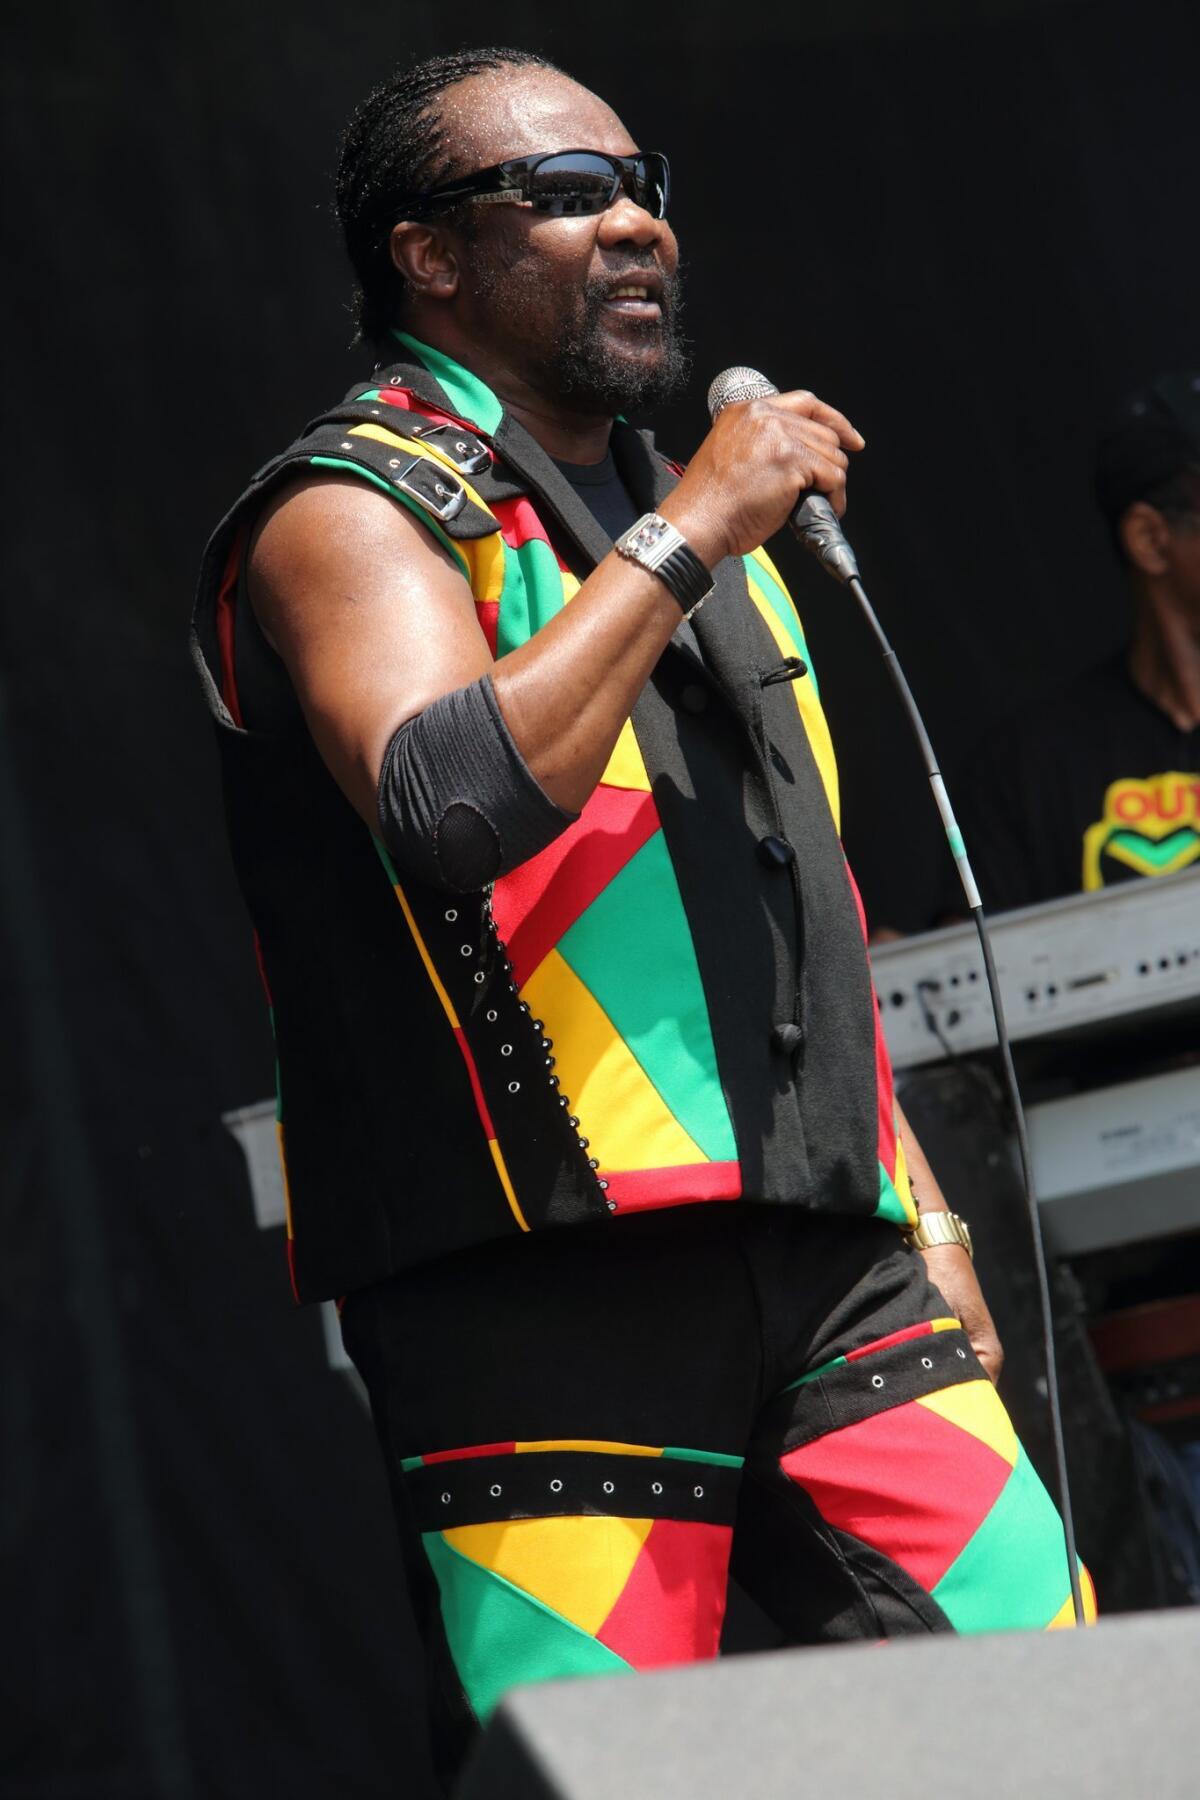 In this May 17, 2013 photo, Toots Hibbert, of Toots and the Maytals, performs at The Hangout Festival in Gulf Shores, Ala.